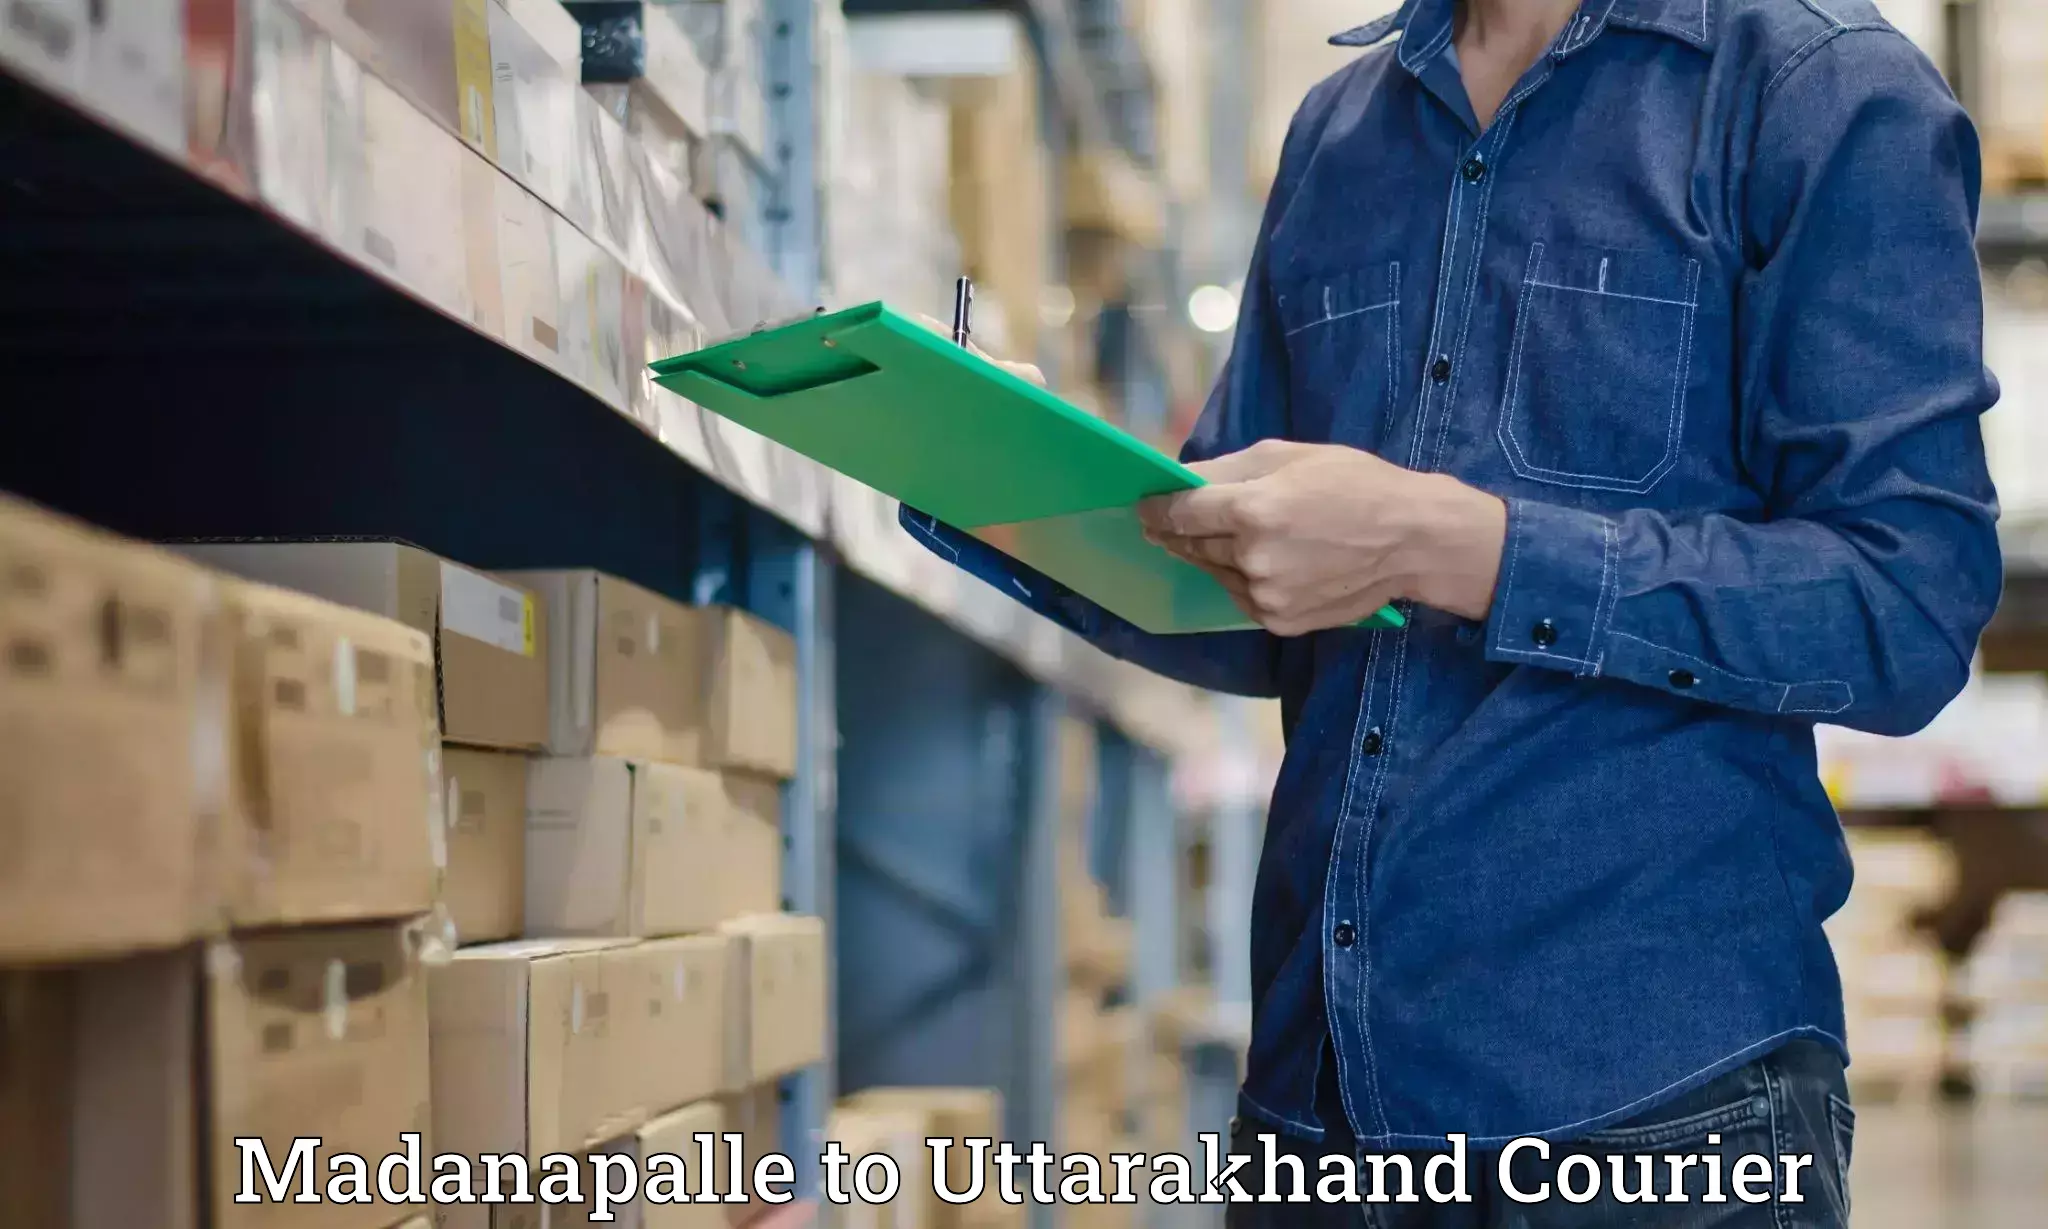 User-friendly delivery service Madanapalle to Roorkee